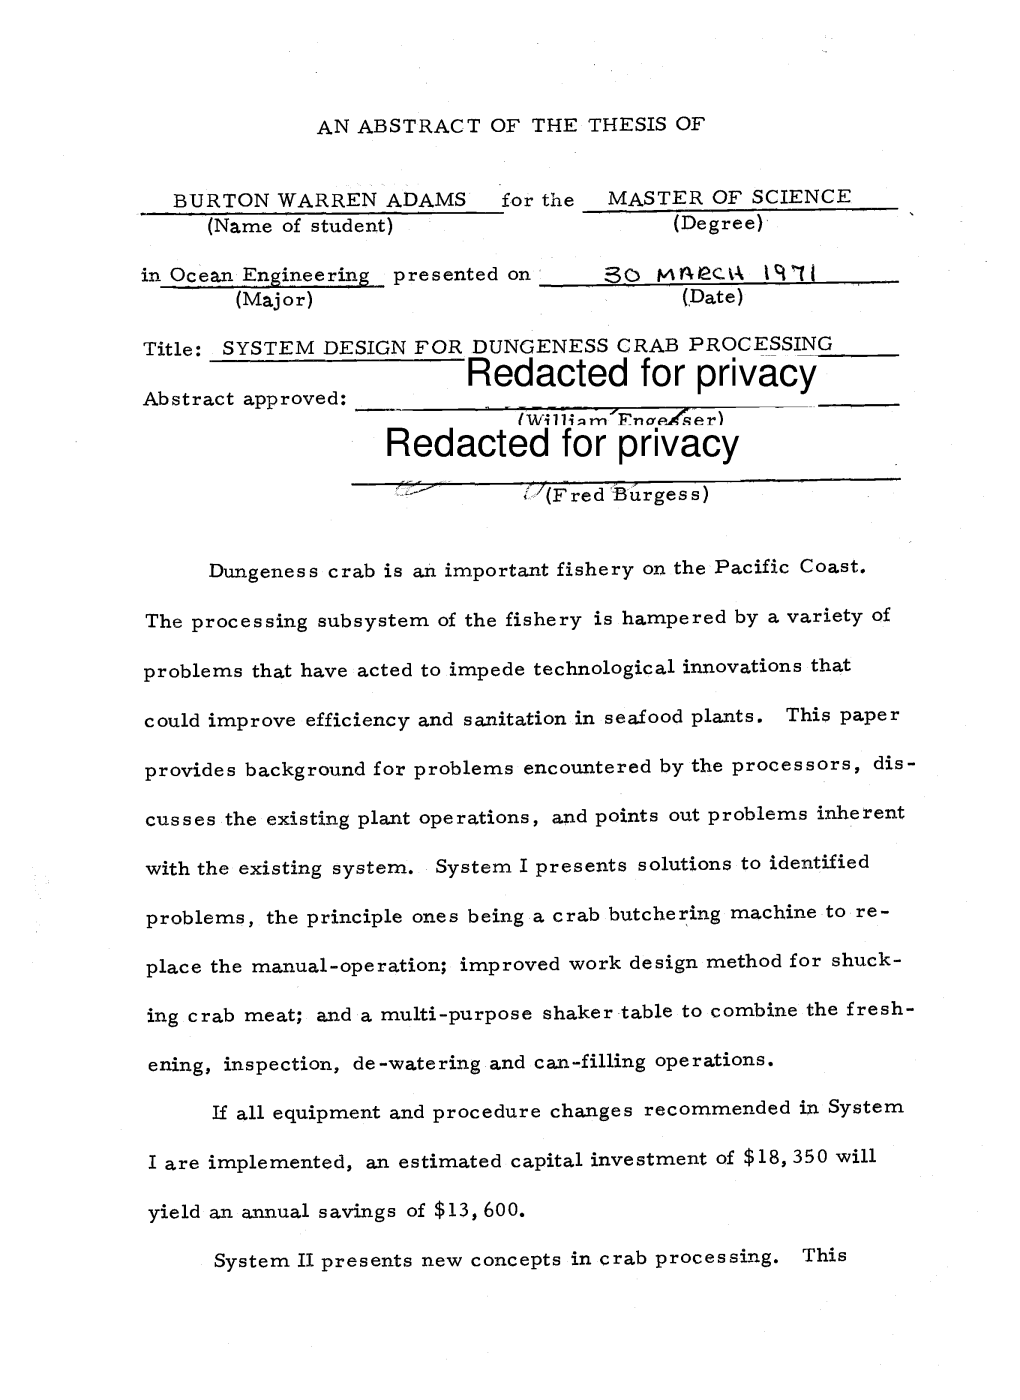 SYSTEM DESIGN for DUNGENESS CRAB PROCESSING Redacted for Privacy Abstract Approved: 1William''fnaeaer) Redacted for Privacy (Fred Burgess)